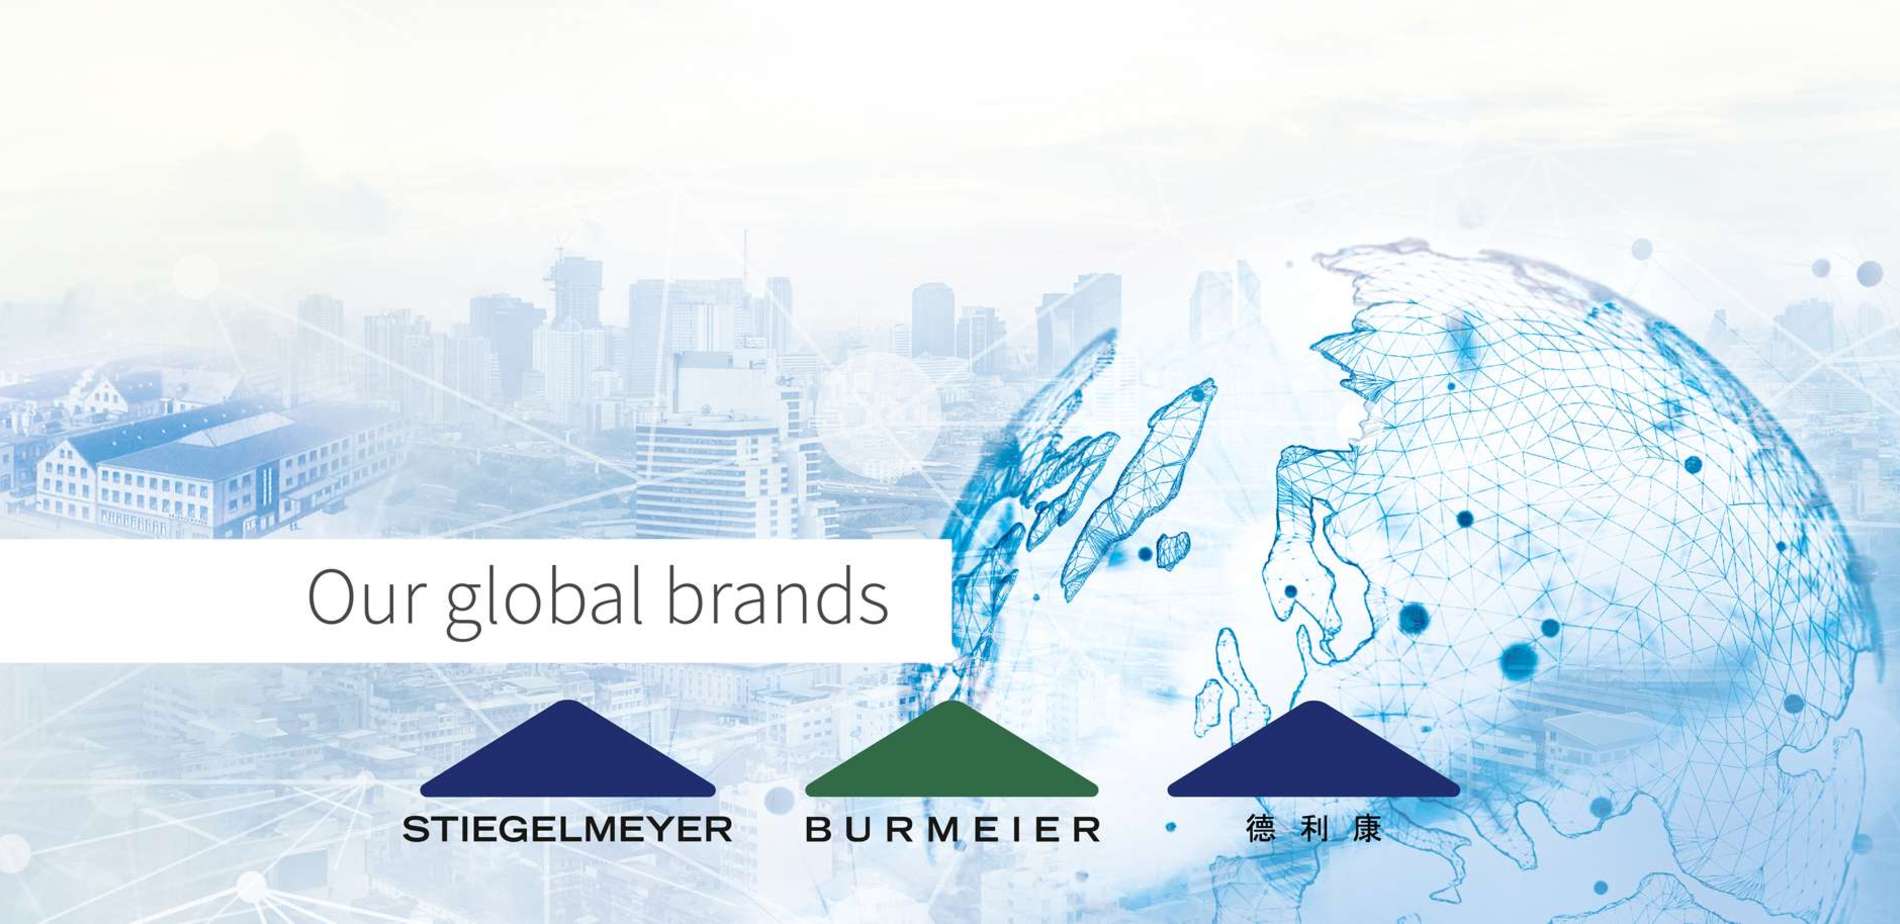 Our global brands